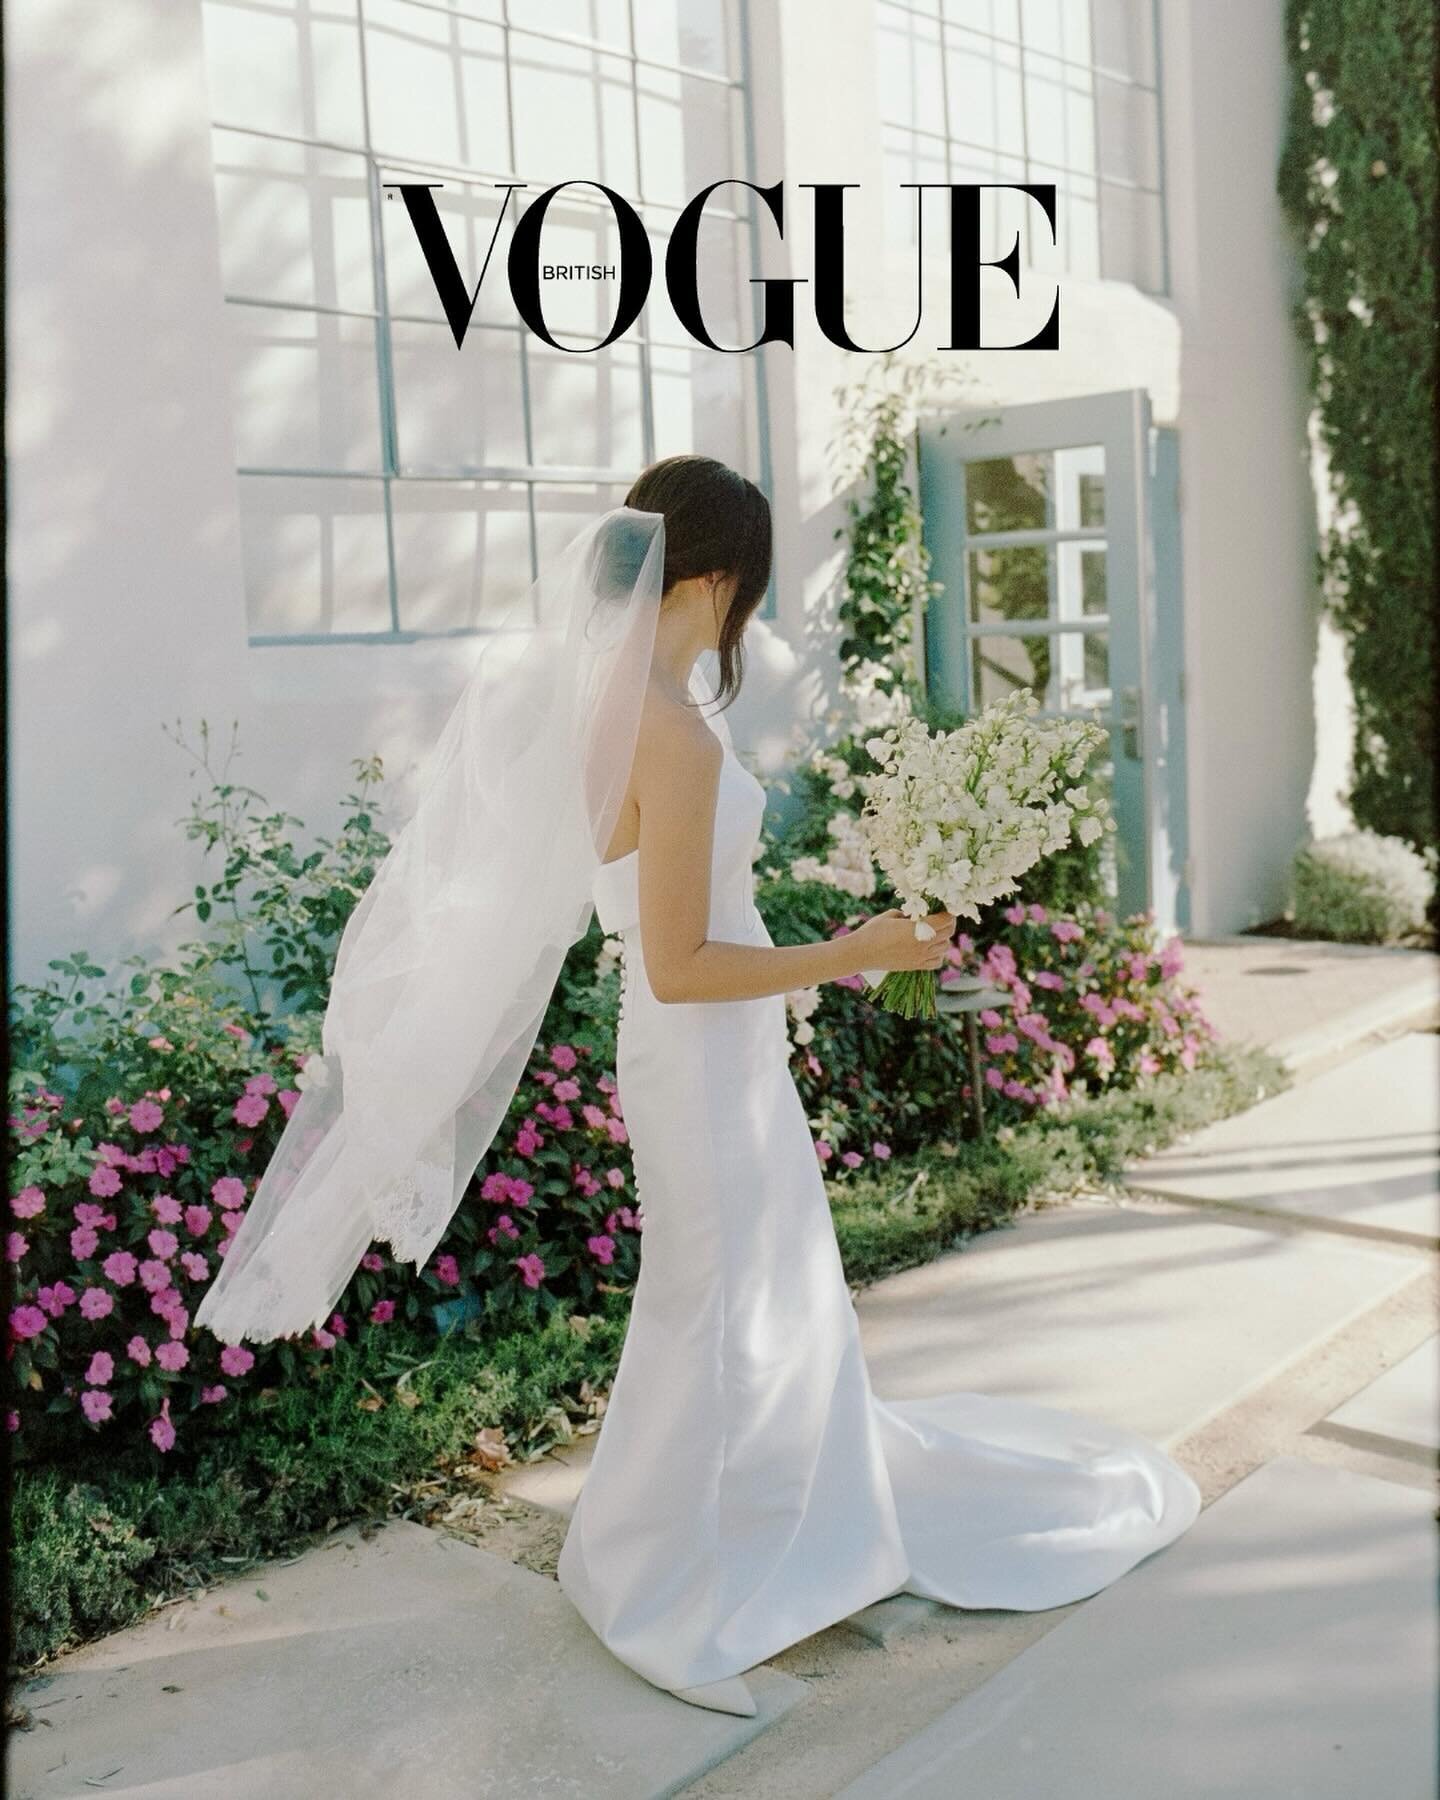 The news is out&mdash;Audrey+Andrew&rsquo;s perfect day is featured in @britishvogue print publication for their Spring Love Story campaign. 

It&rsquo;s surreal seeing a goal come to life and I&rsquo;ll be giddy the rest of the day. ✨